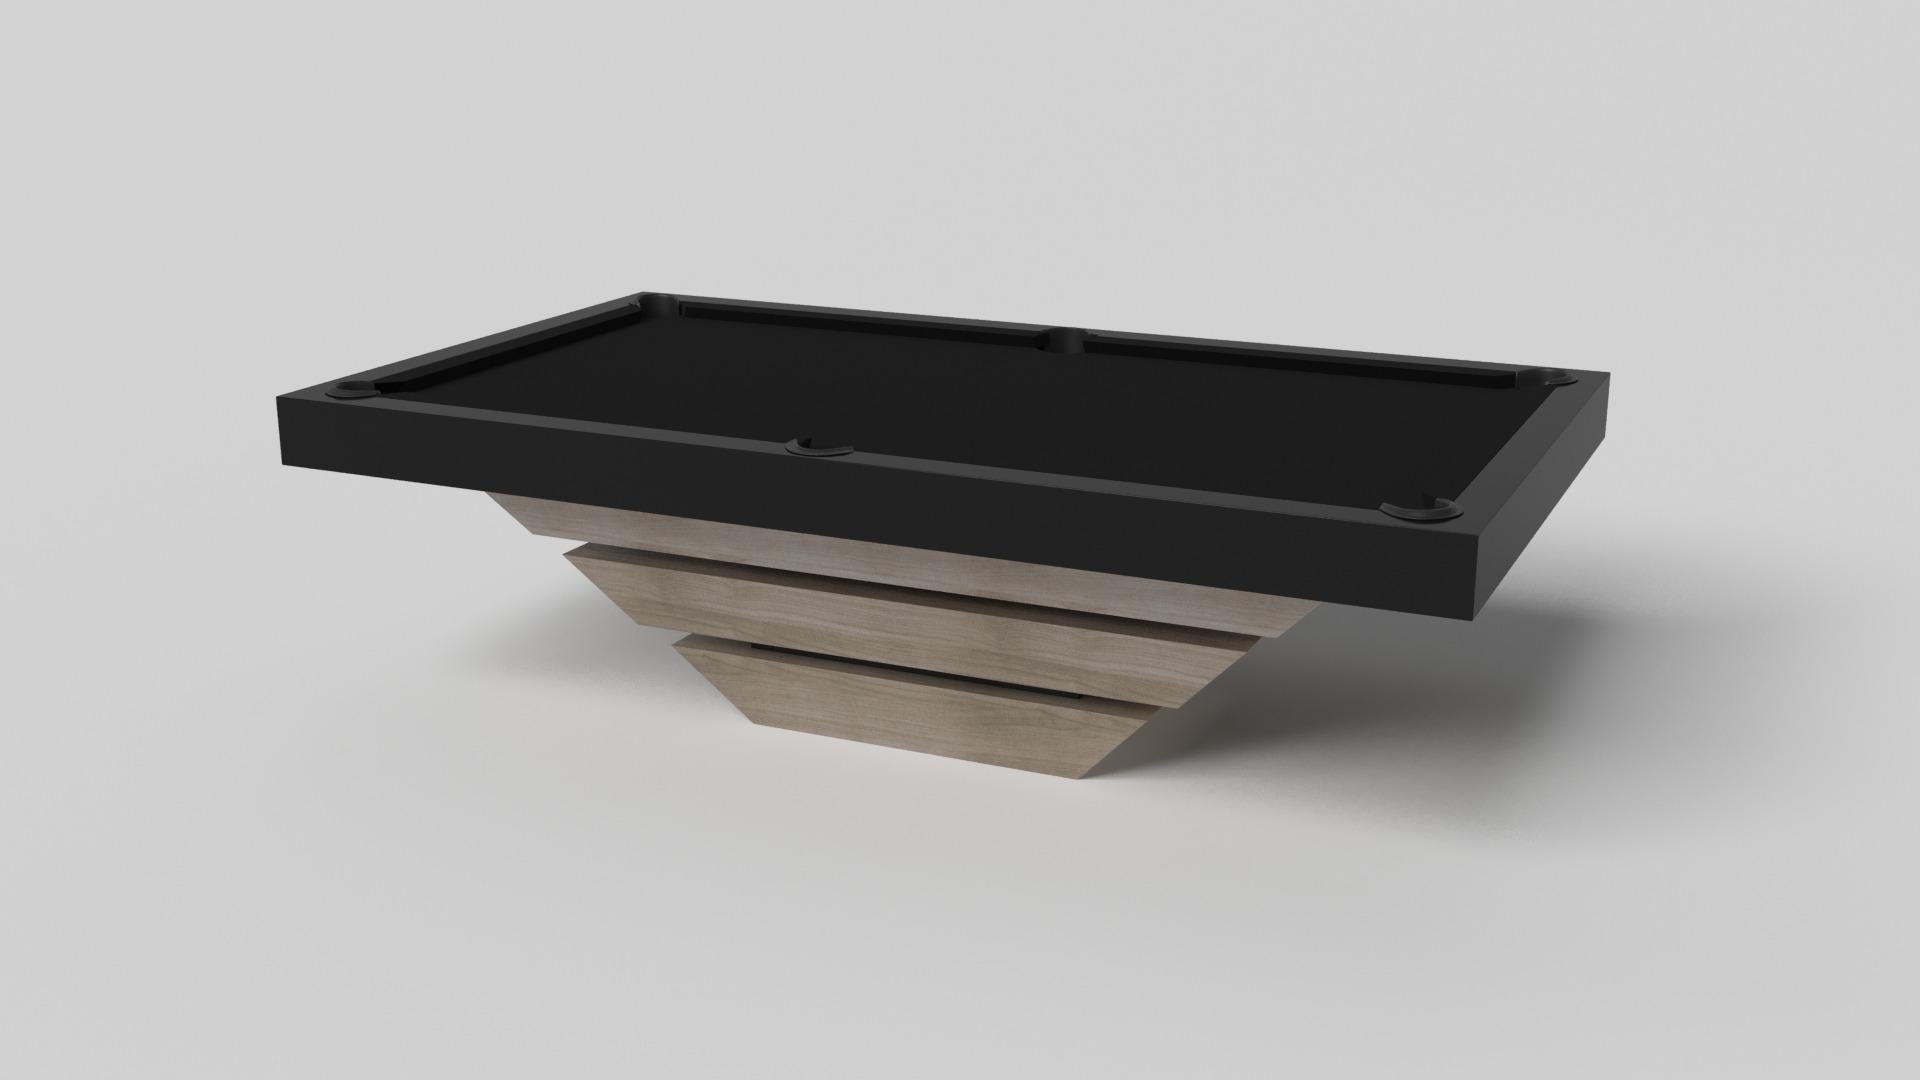 Three solid pieces of metal seemingly float around a concealed center base, making the Louve pool table in chrome one of our most mind-bending designs. Crafted from durable metal and detailed with a felt surface on top, this contemporary game table